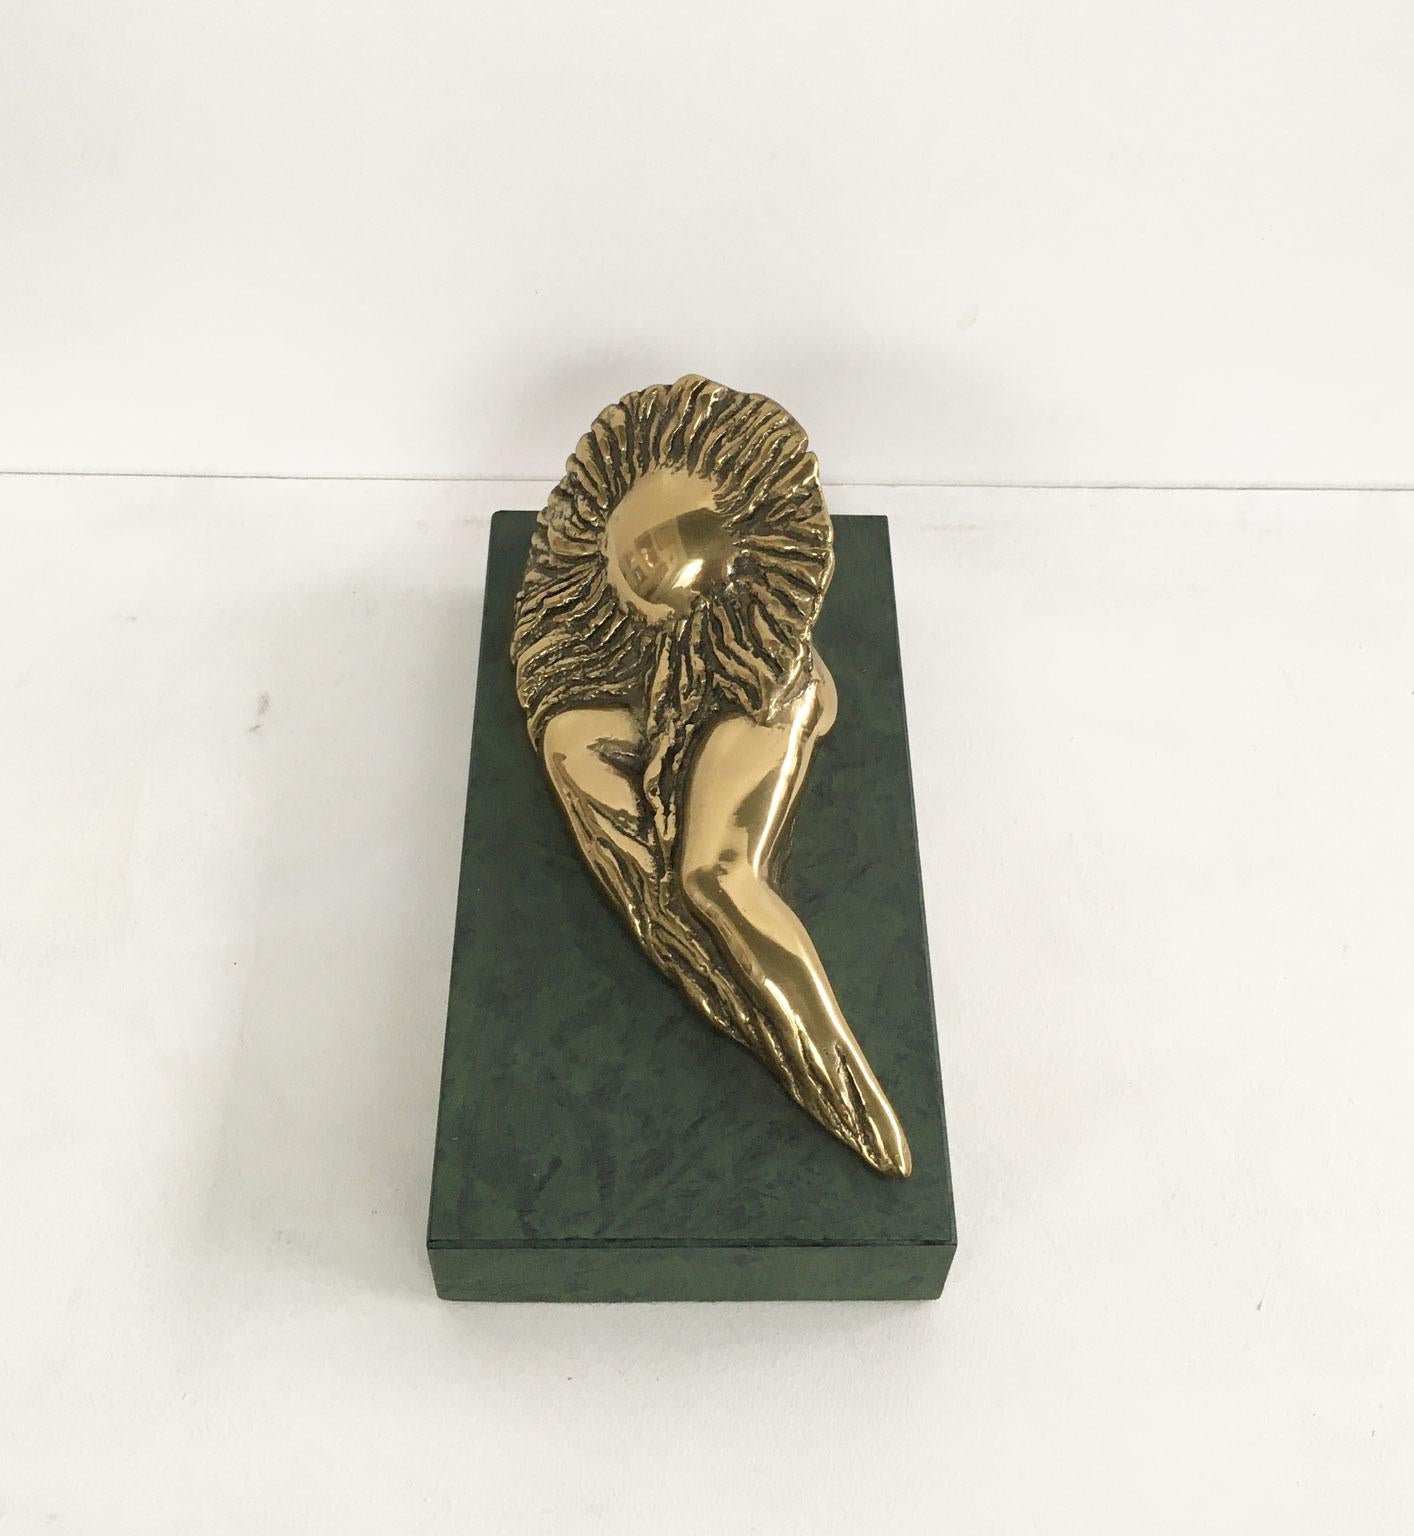 This is an engaging bronze sculpture create by the Italian artist Patrizia Guerresi, in the 1986. The piece is a multiple of 1000 specimen on a green painted wooden base. The title of this artwork is"Donnasole" translate in Sun Woman. 

Patrizia